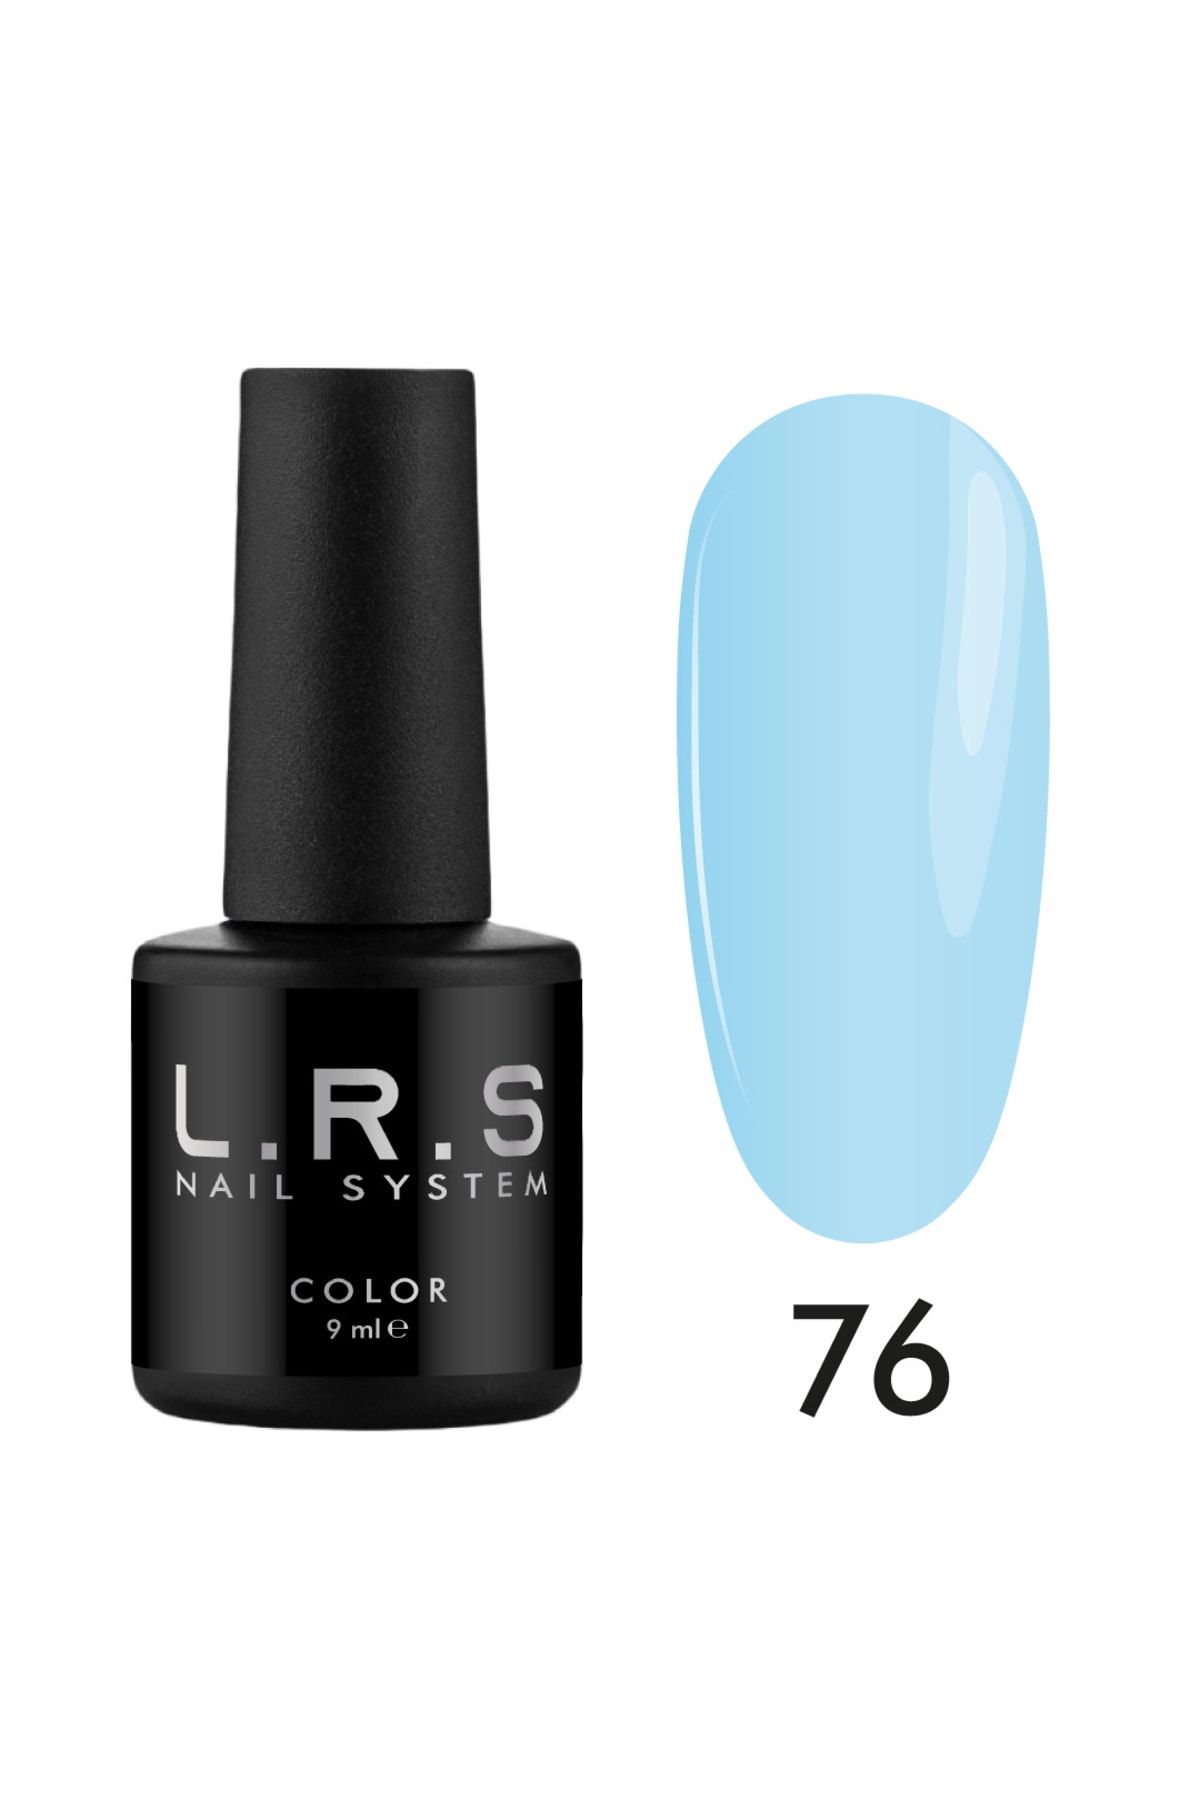 PNB Lrs Nail System 9ml Color 76